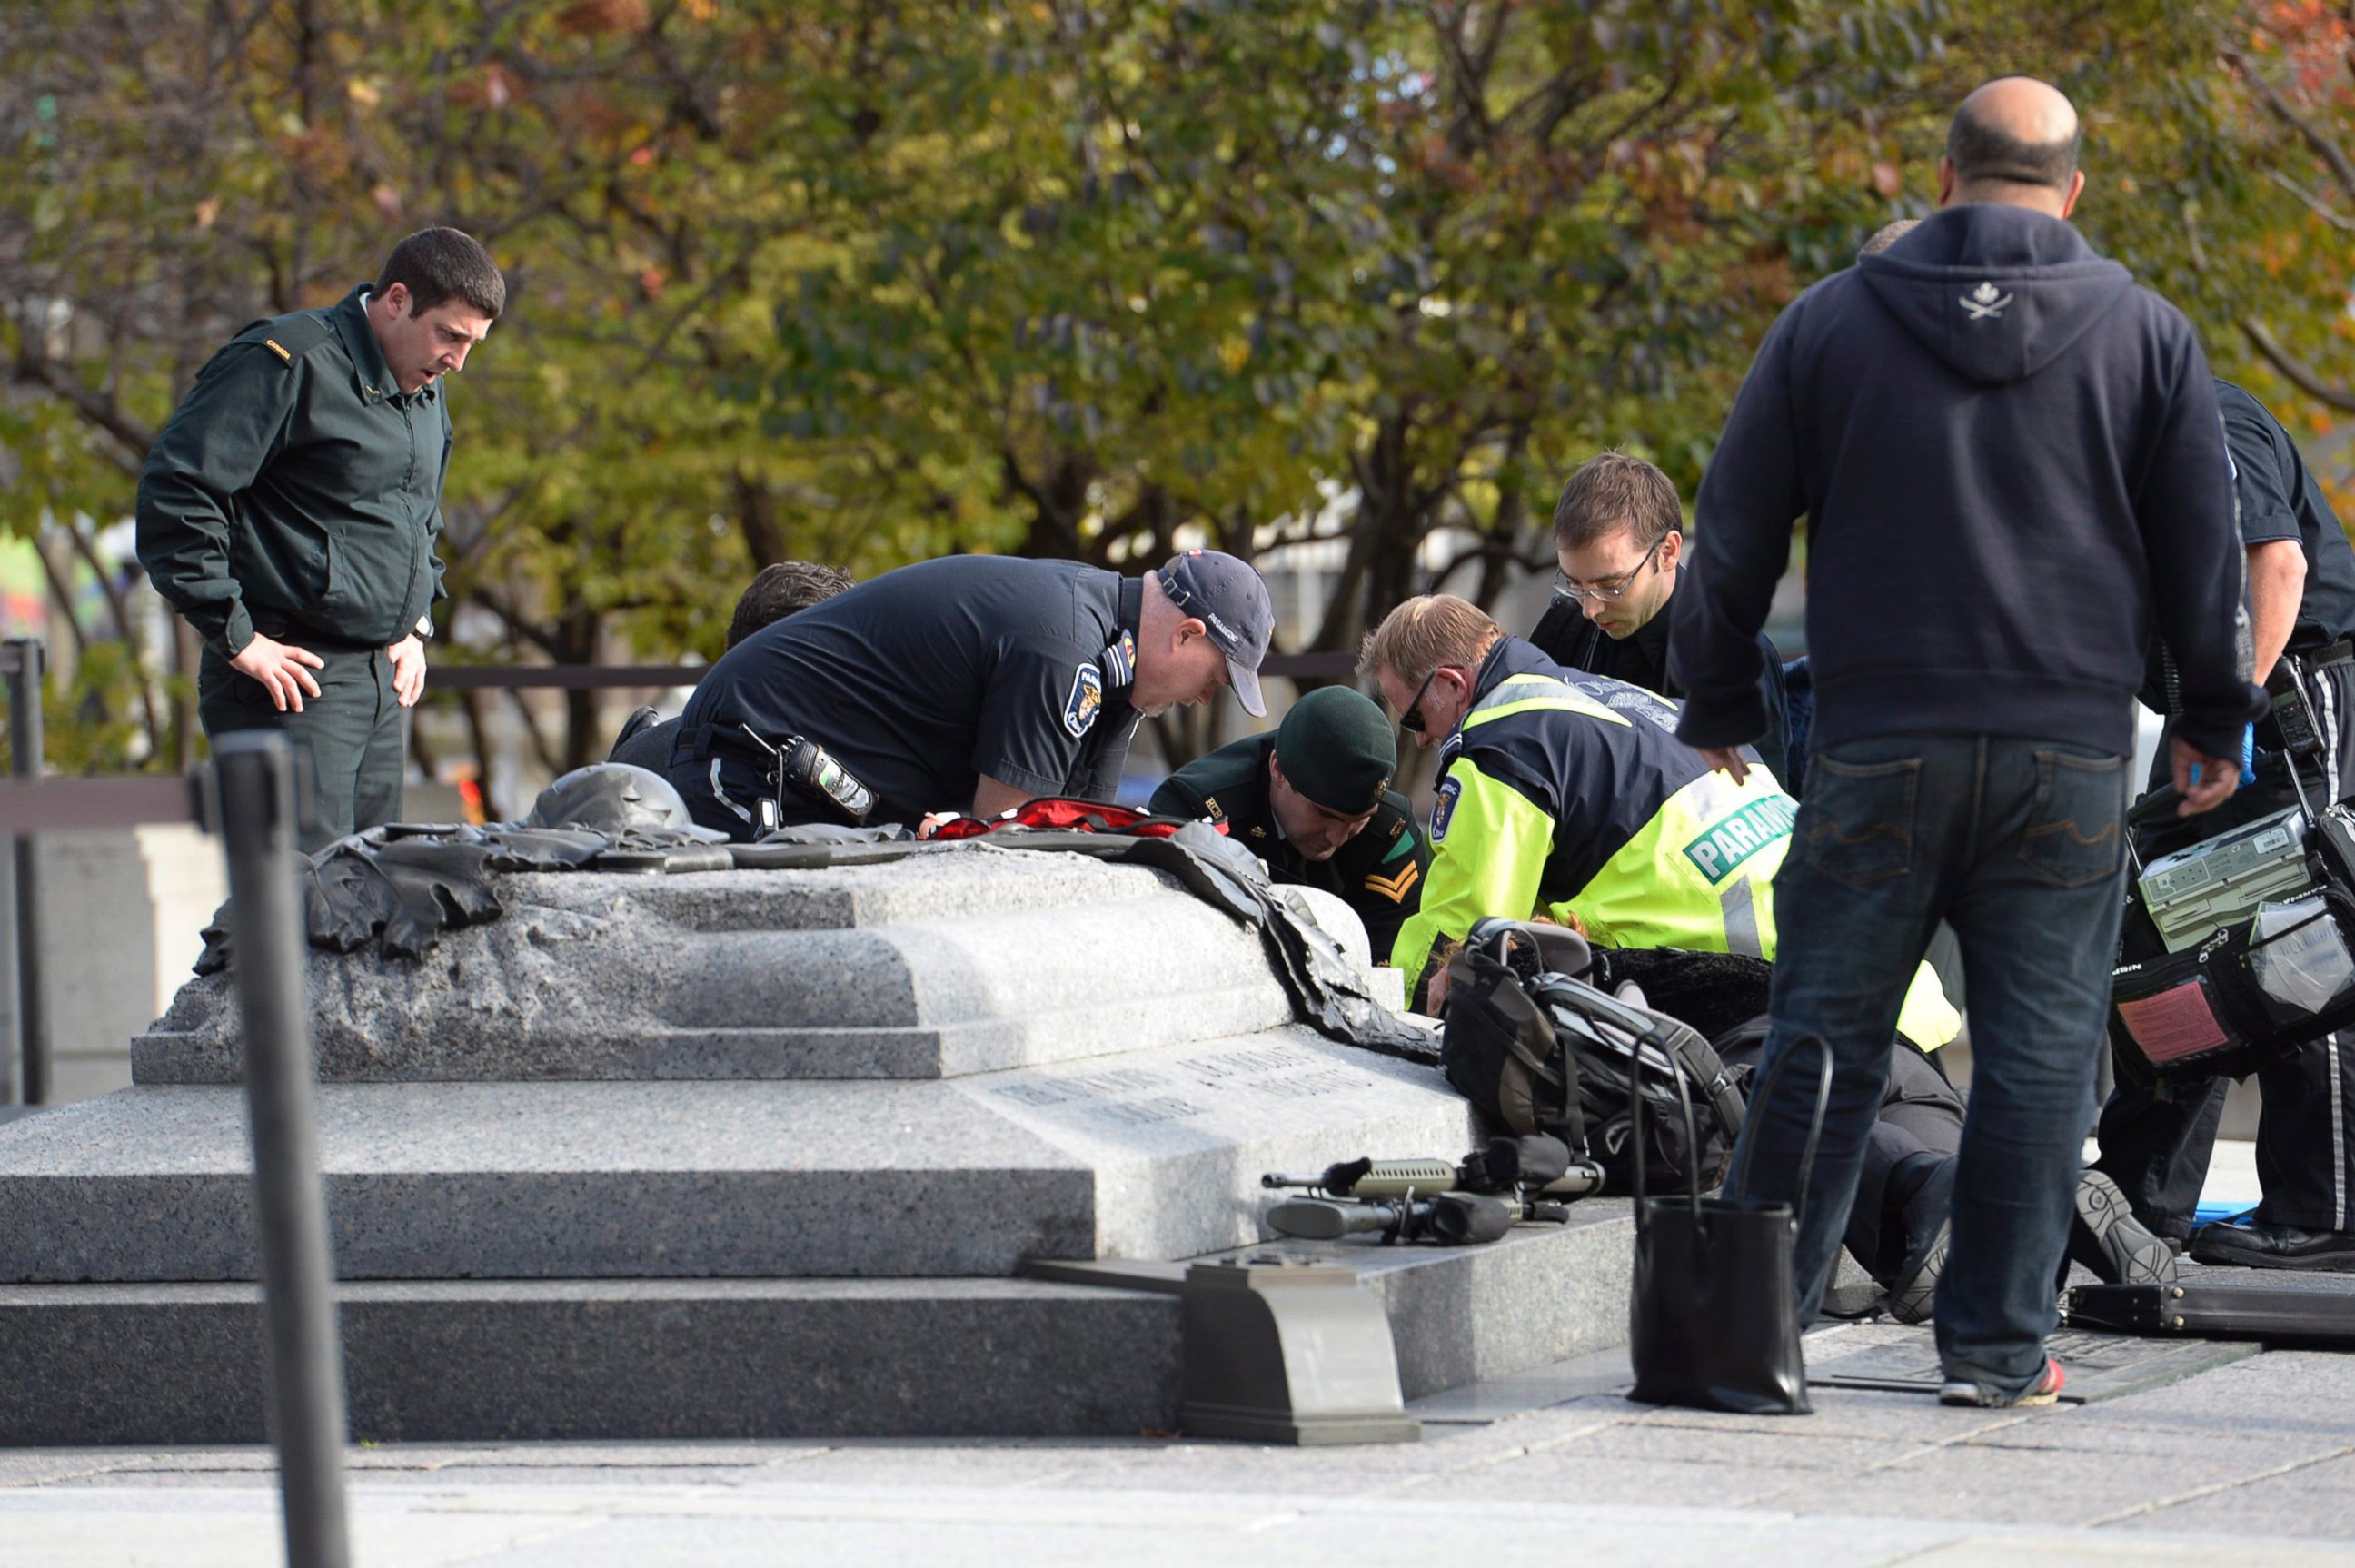 PHOTO: Emergency personnel tend to a soldier shot at the National Memorial near Parliament Hill in Ottawa, Oct. 22, 2014.